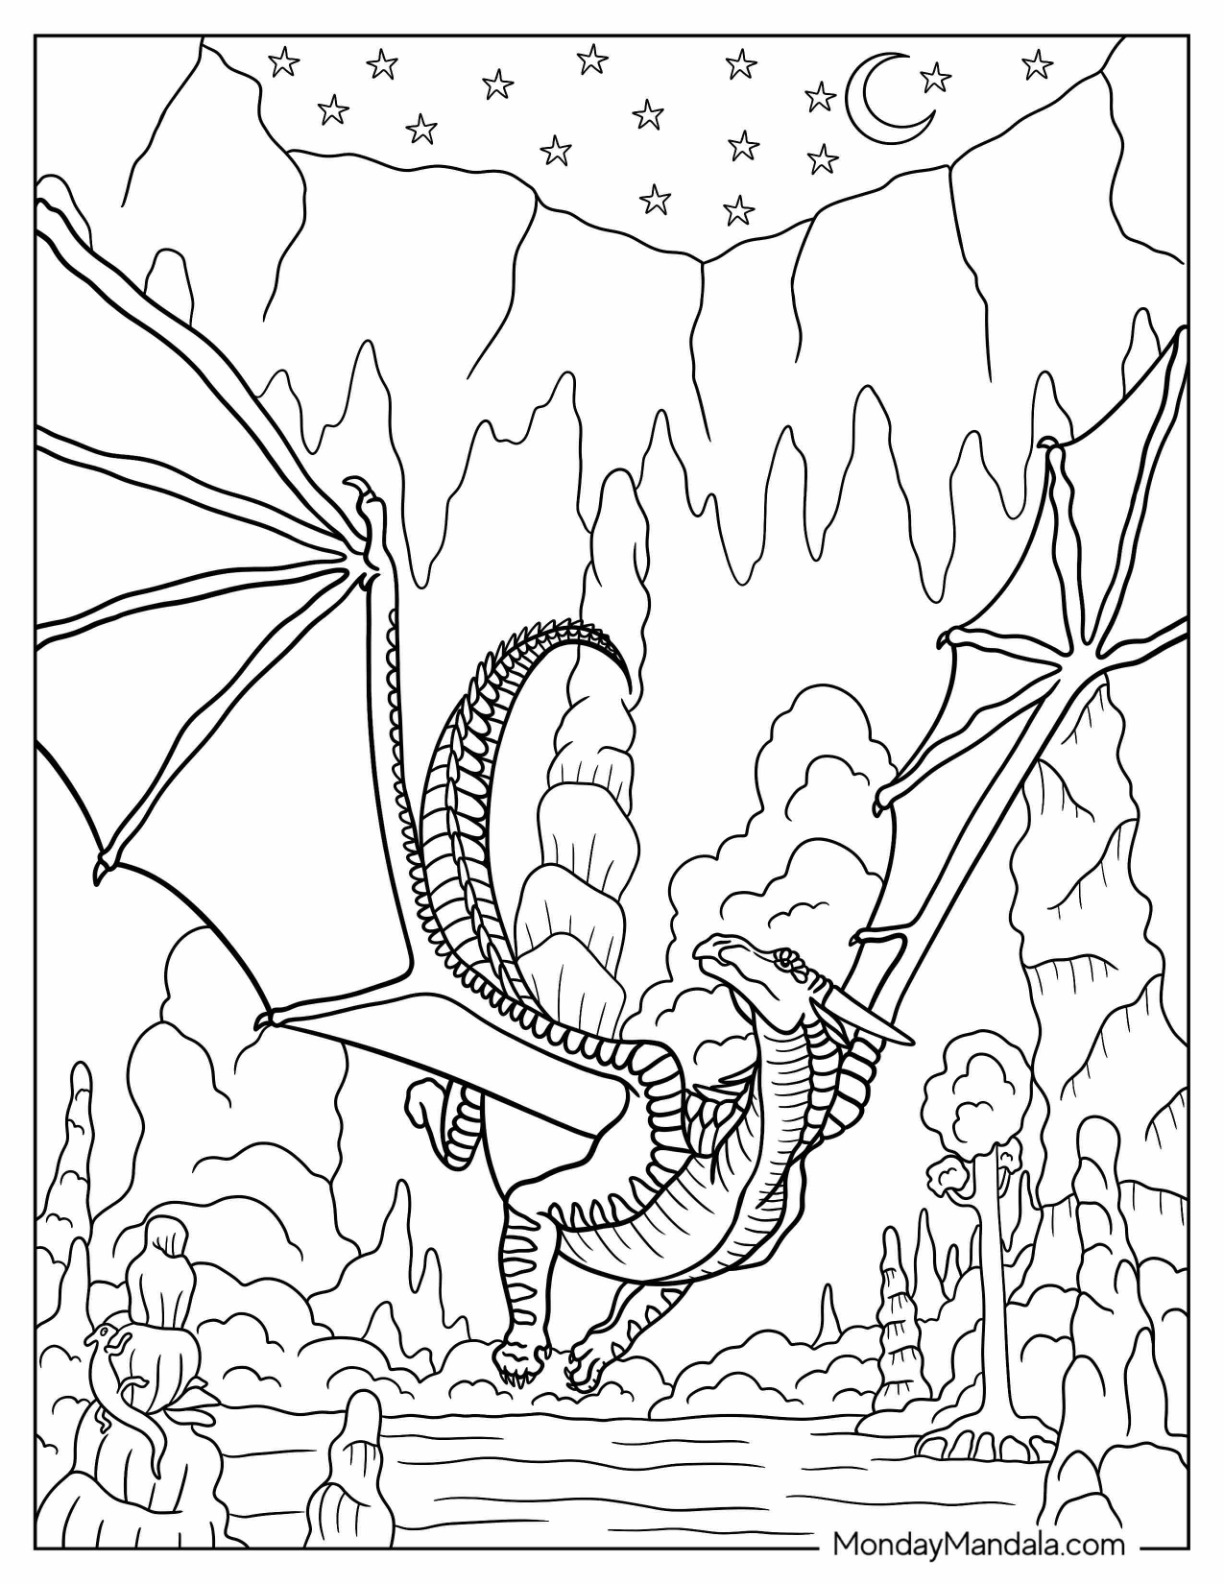 Wings of fire coloring pages free pdf printables